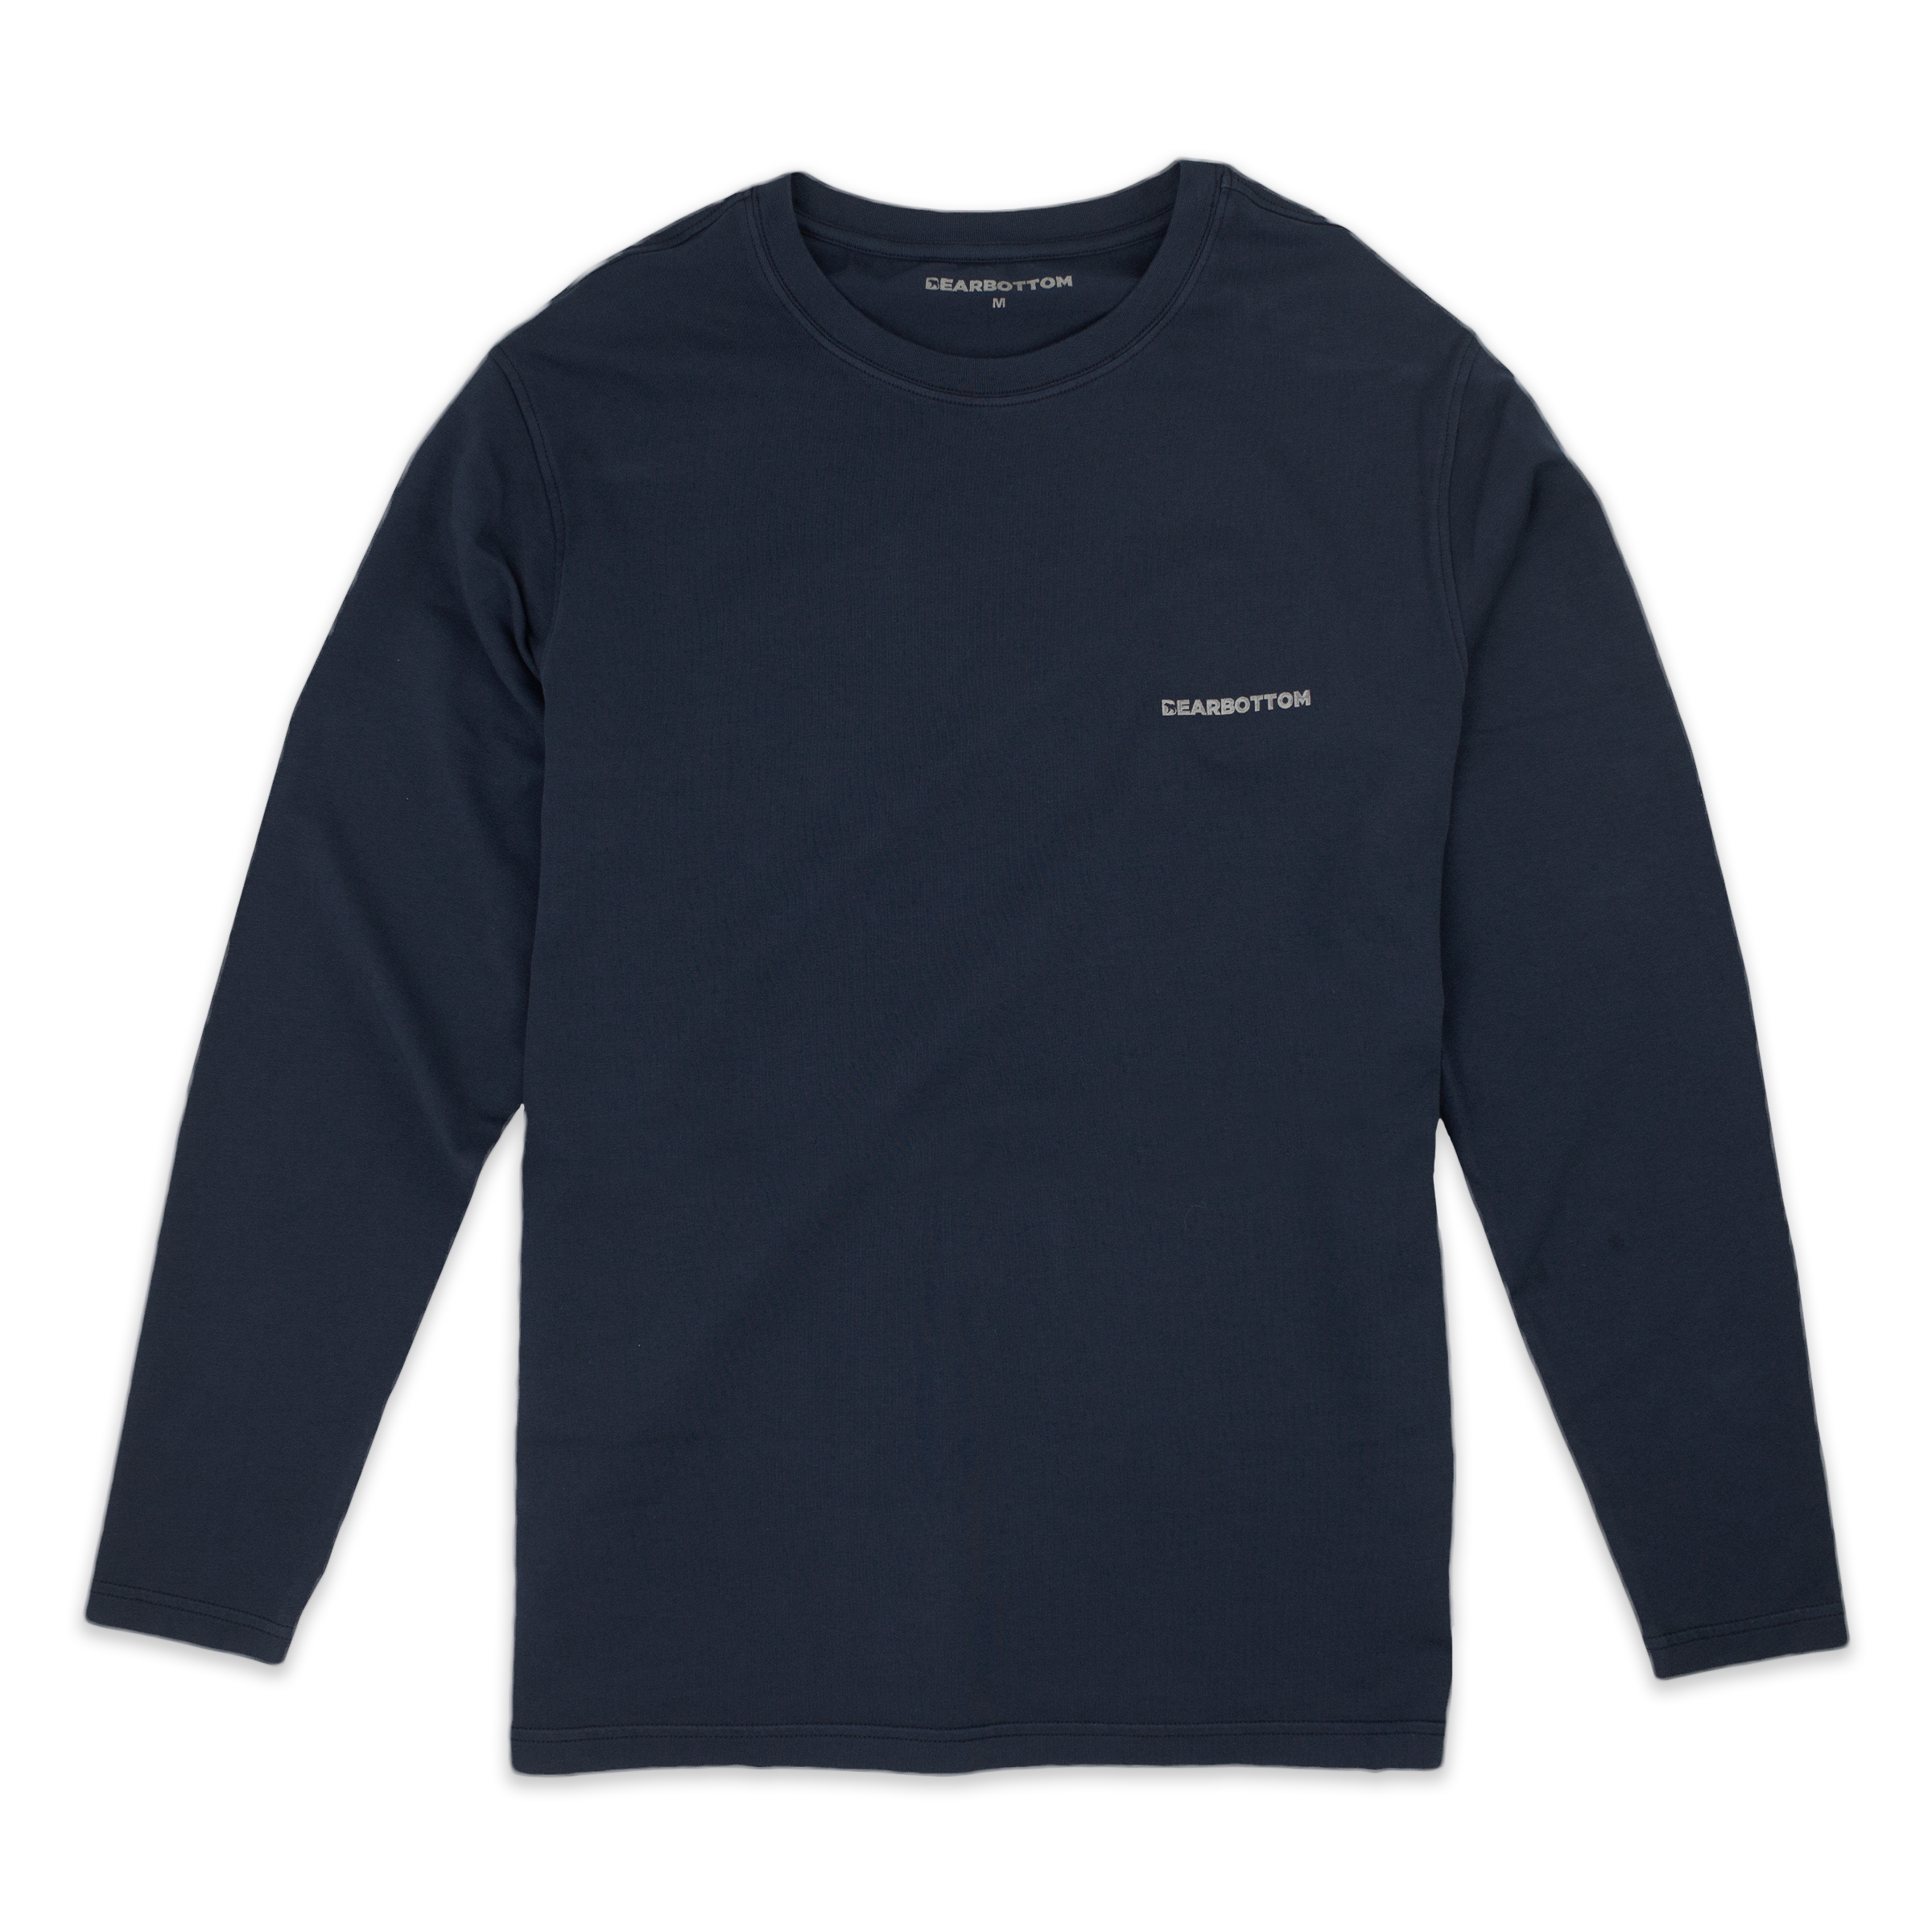 Natural Dye Logo Long Sleeve Tee in Navy blue with Crewneck and Bearbottom printed in grey on front left chest